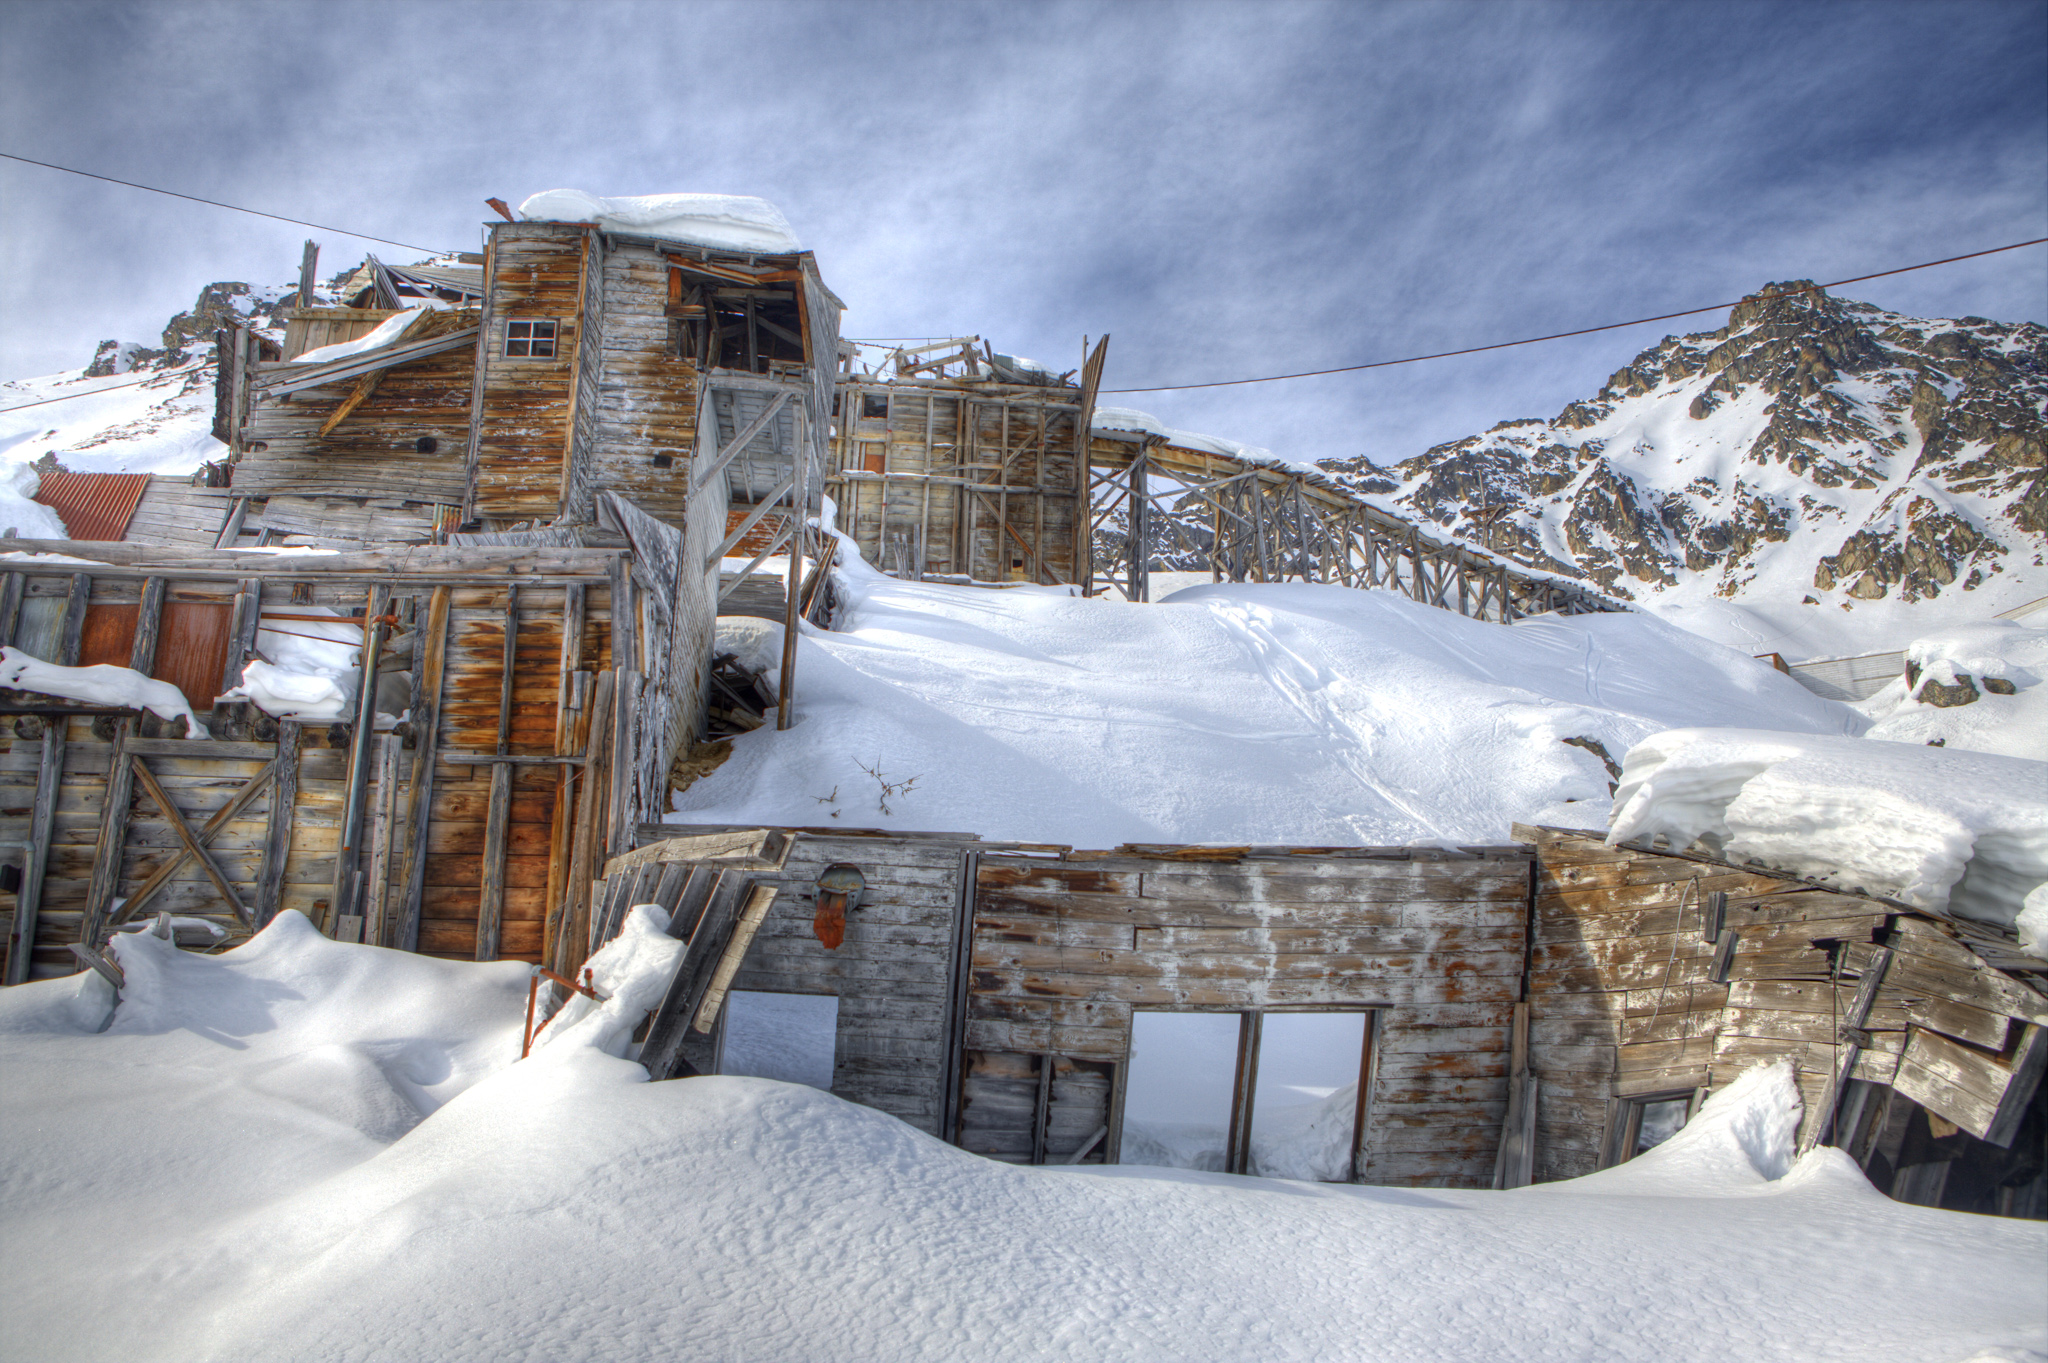 Hatcher Pass offers incredible views of whats left of the old mining operations.